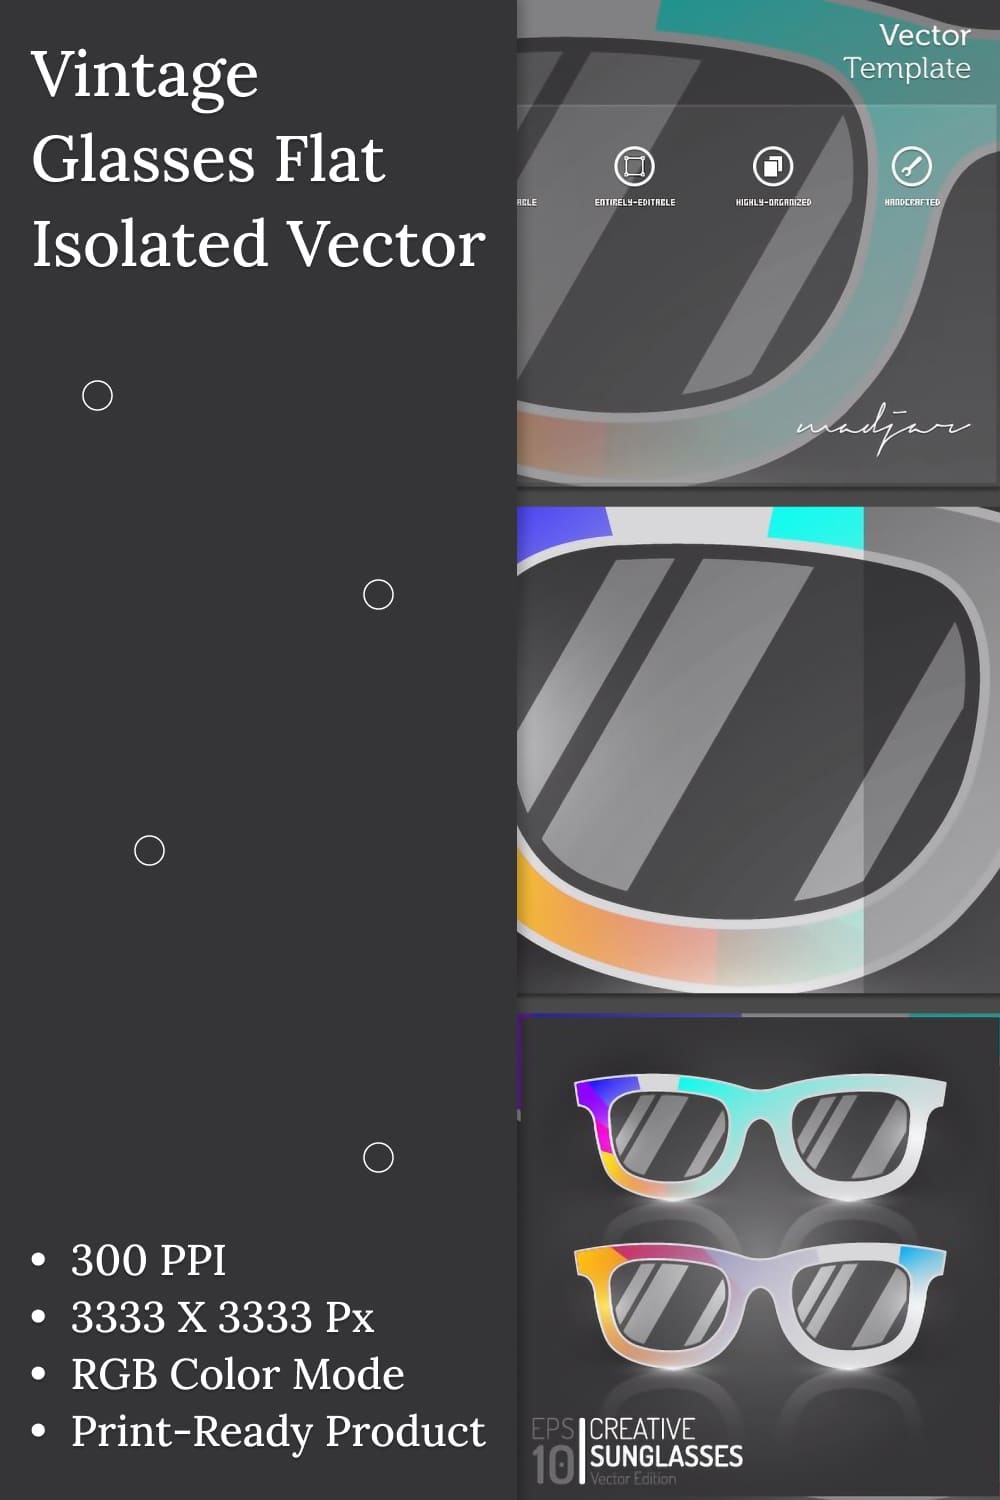 Vintage glasses flat isolated vector pinterest image.